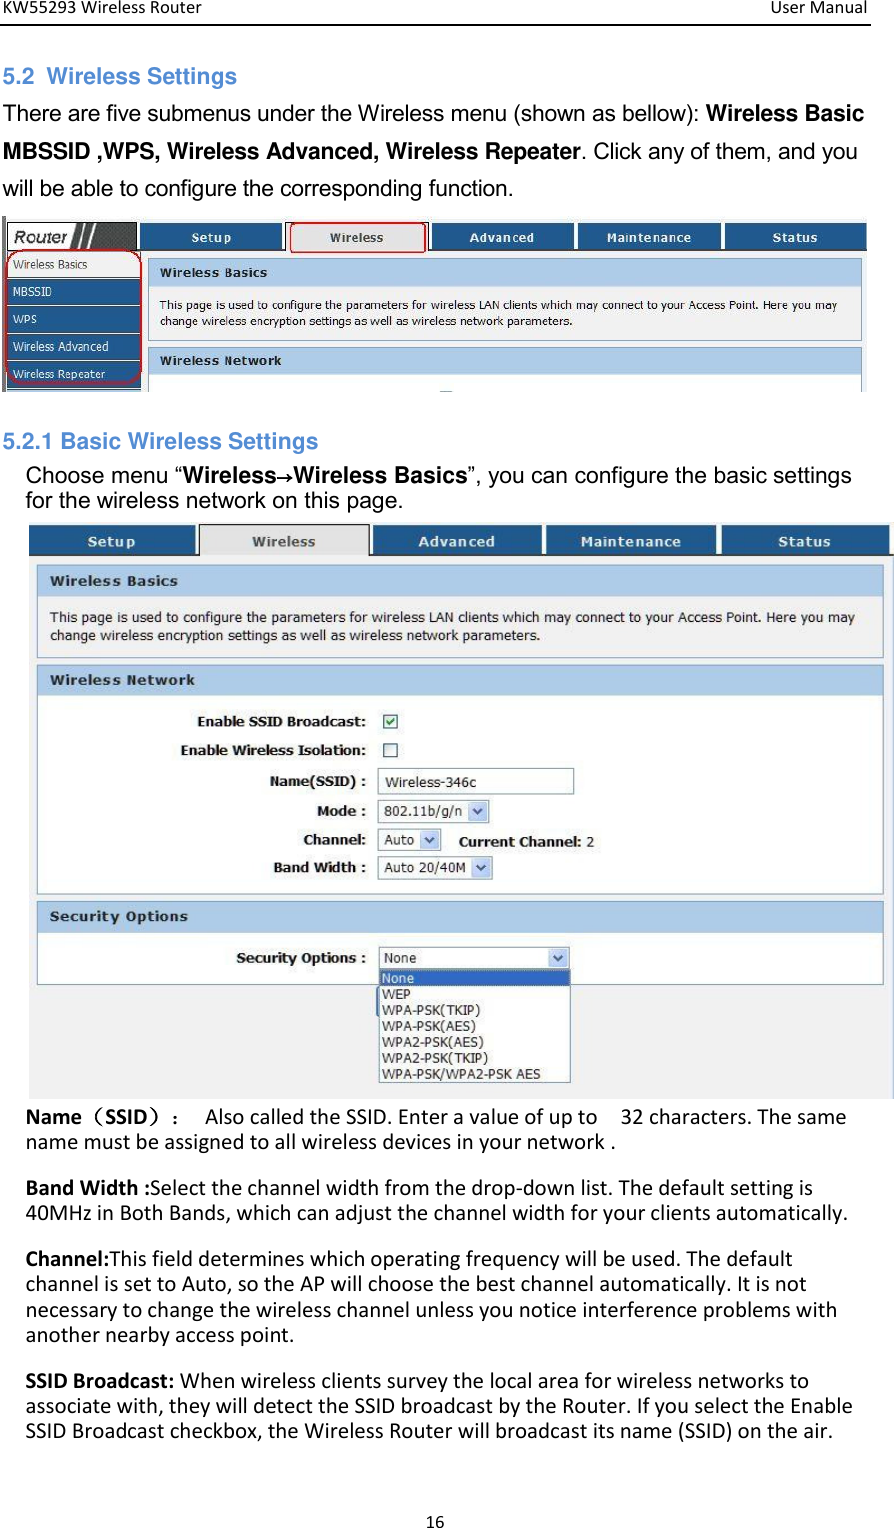 KW55293 Wireless Router         User Manual 16 5.2  Wireless Settings There are five submenus under the Wireless menu (shown as bellow): Wireless Basic MBSSID ,WPS, Wireless Advanced, Wireless Repeater. Click any of them, and you will be able to configure the corresponding function.            5.2.1 Basic Wireless Settings   Choose menu “Wireless→Wireless Basics”, you can configure the basic settings for the wireless network on this page.                    NameSSID：  Also called the SSID. Enter a value of up to    32 characters. The same name must be assigned to all wireless devices in your network . Band Width :Select the channel width from the drop-down list. The default setting is 40MHz in Both Bands, which can adjust the channel width for your clients automatically.   Channel:This field determines which operating frequency will be used. The default channel is set to Auto, so the AP will choose the best channel automatically. It is not necessary to change the wireless channel unless you notice interference problems with another nearby access point.   SSID Broadcast: When wireless clients survey the local area for wireless networks to associate with, they will detect the SSID broadcast by the Router. If you select the Enable SSID Broadcast checkbox, the Wireless Router will broadcast its name (SSID) on the air.   